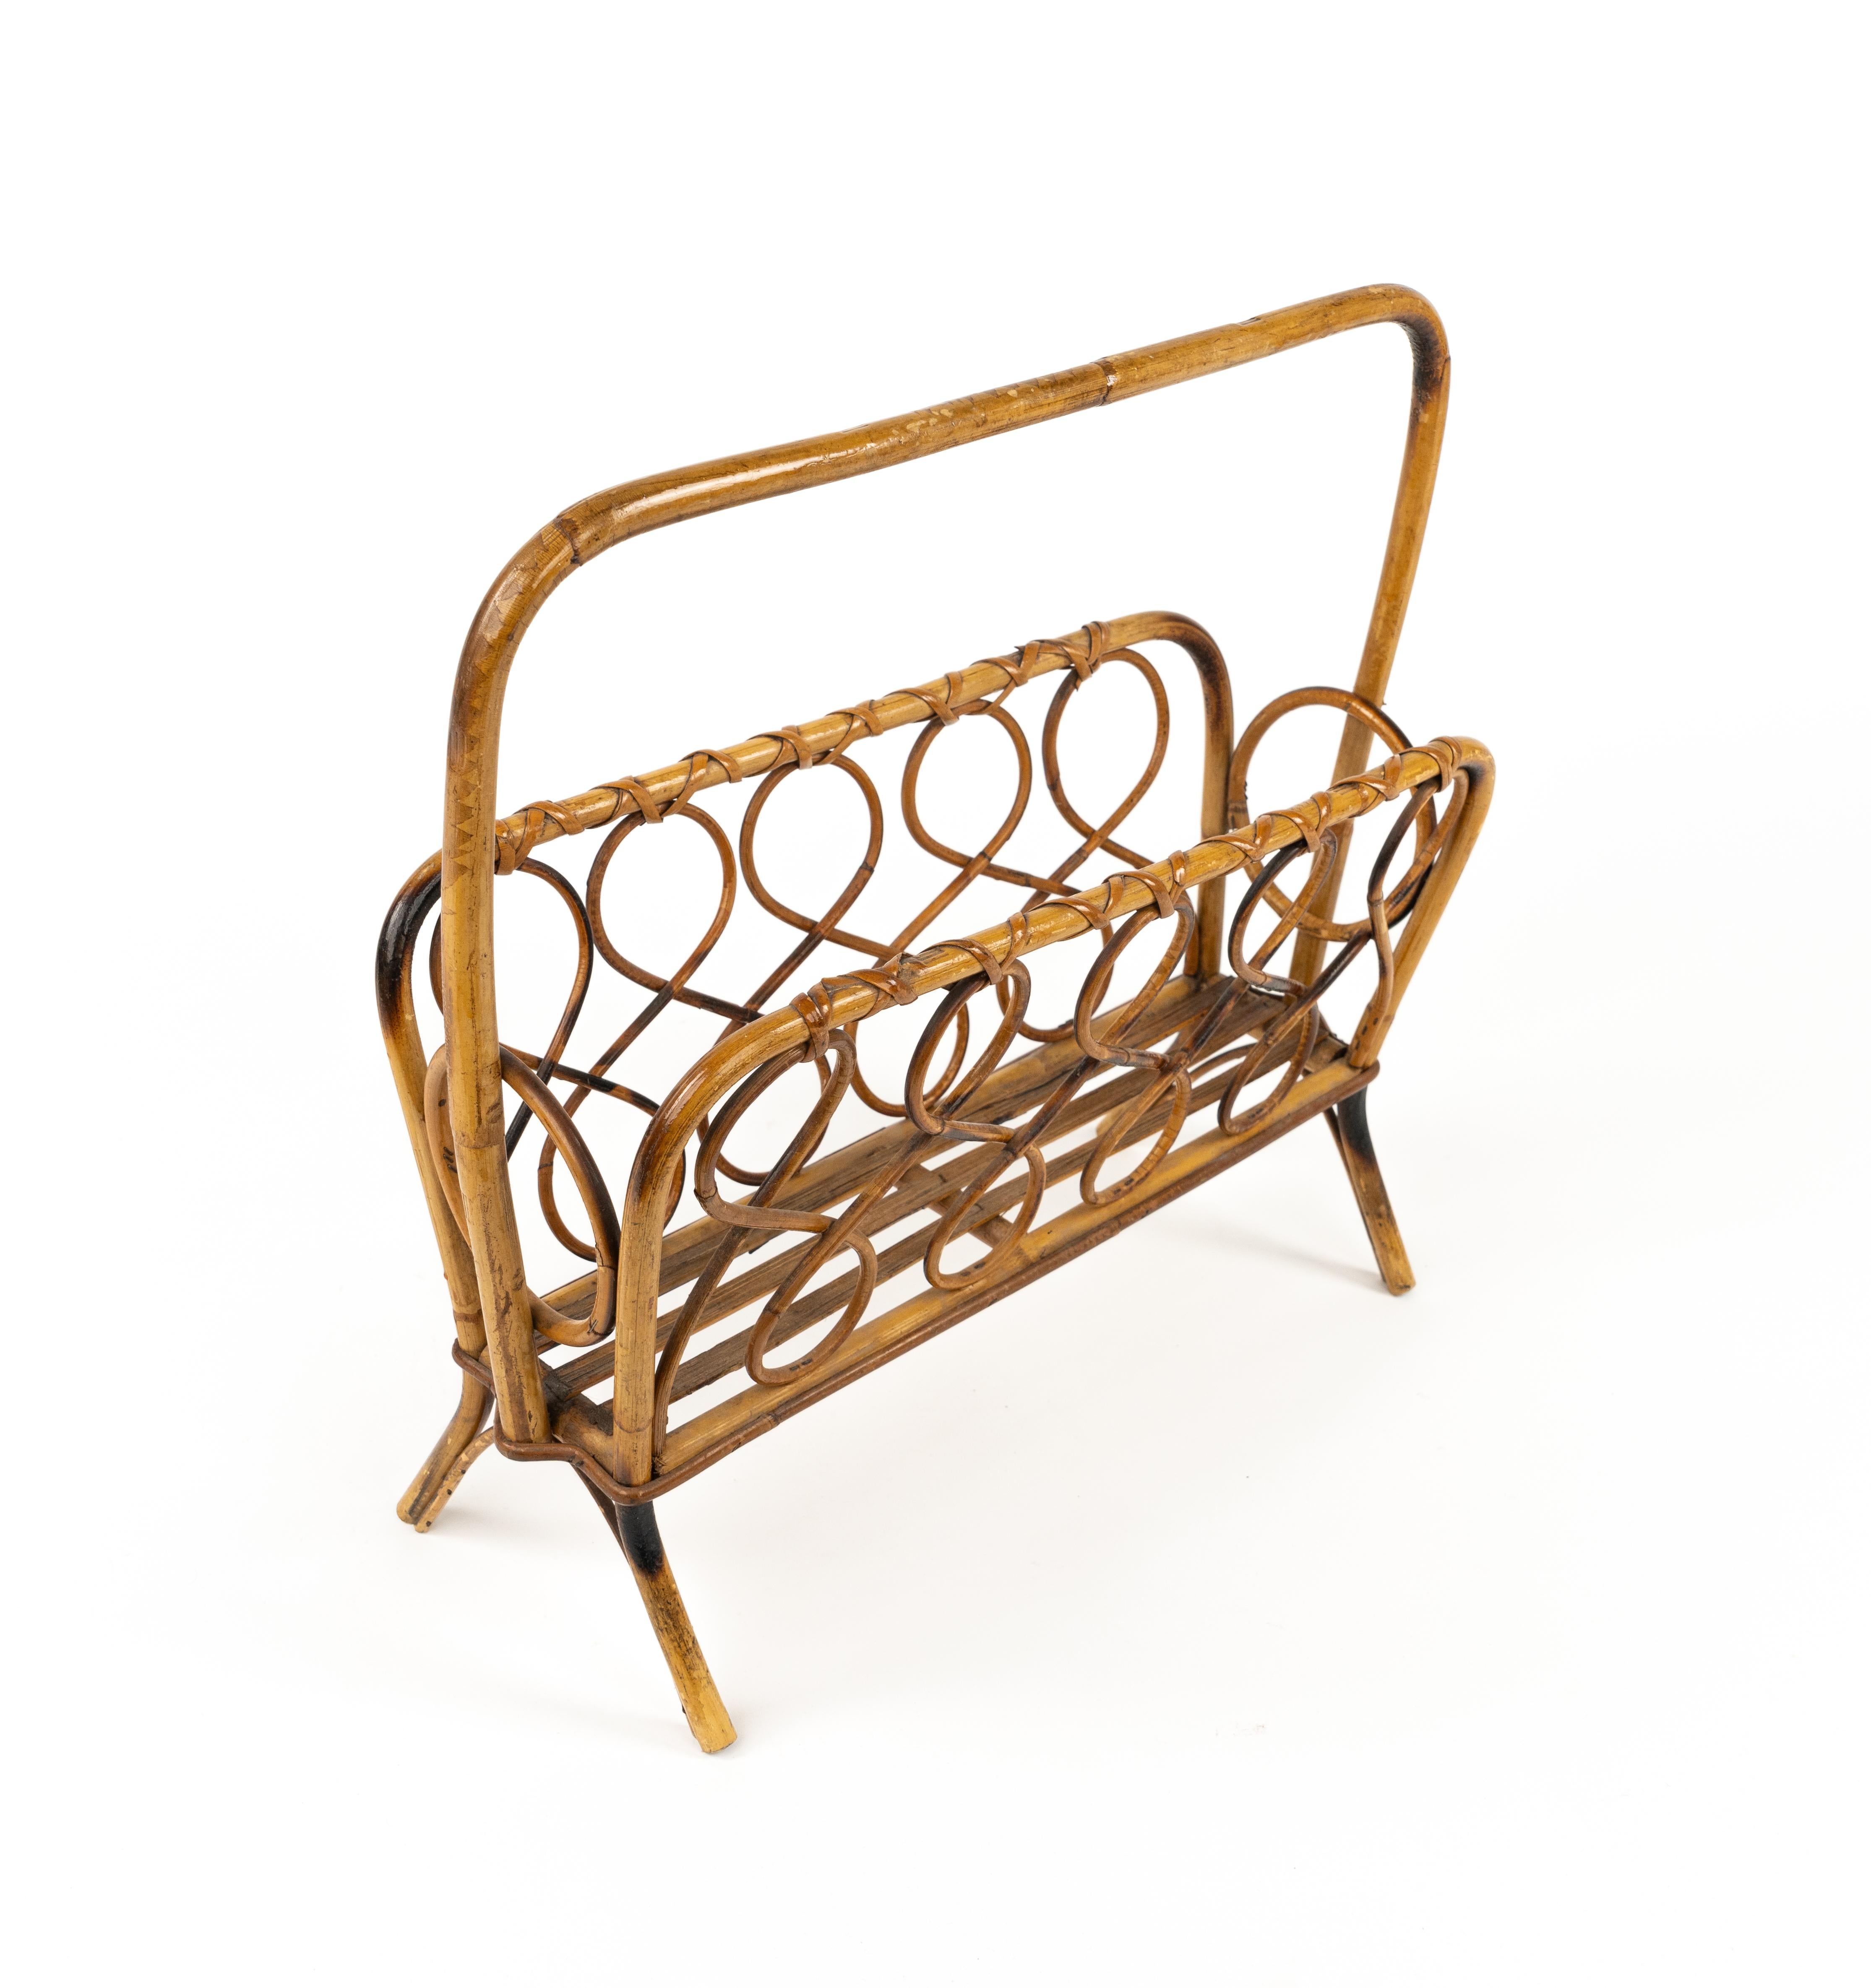 Midcentury Rattan and Bamboo Magazine Rack, Italy 1960s For Sale 6